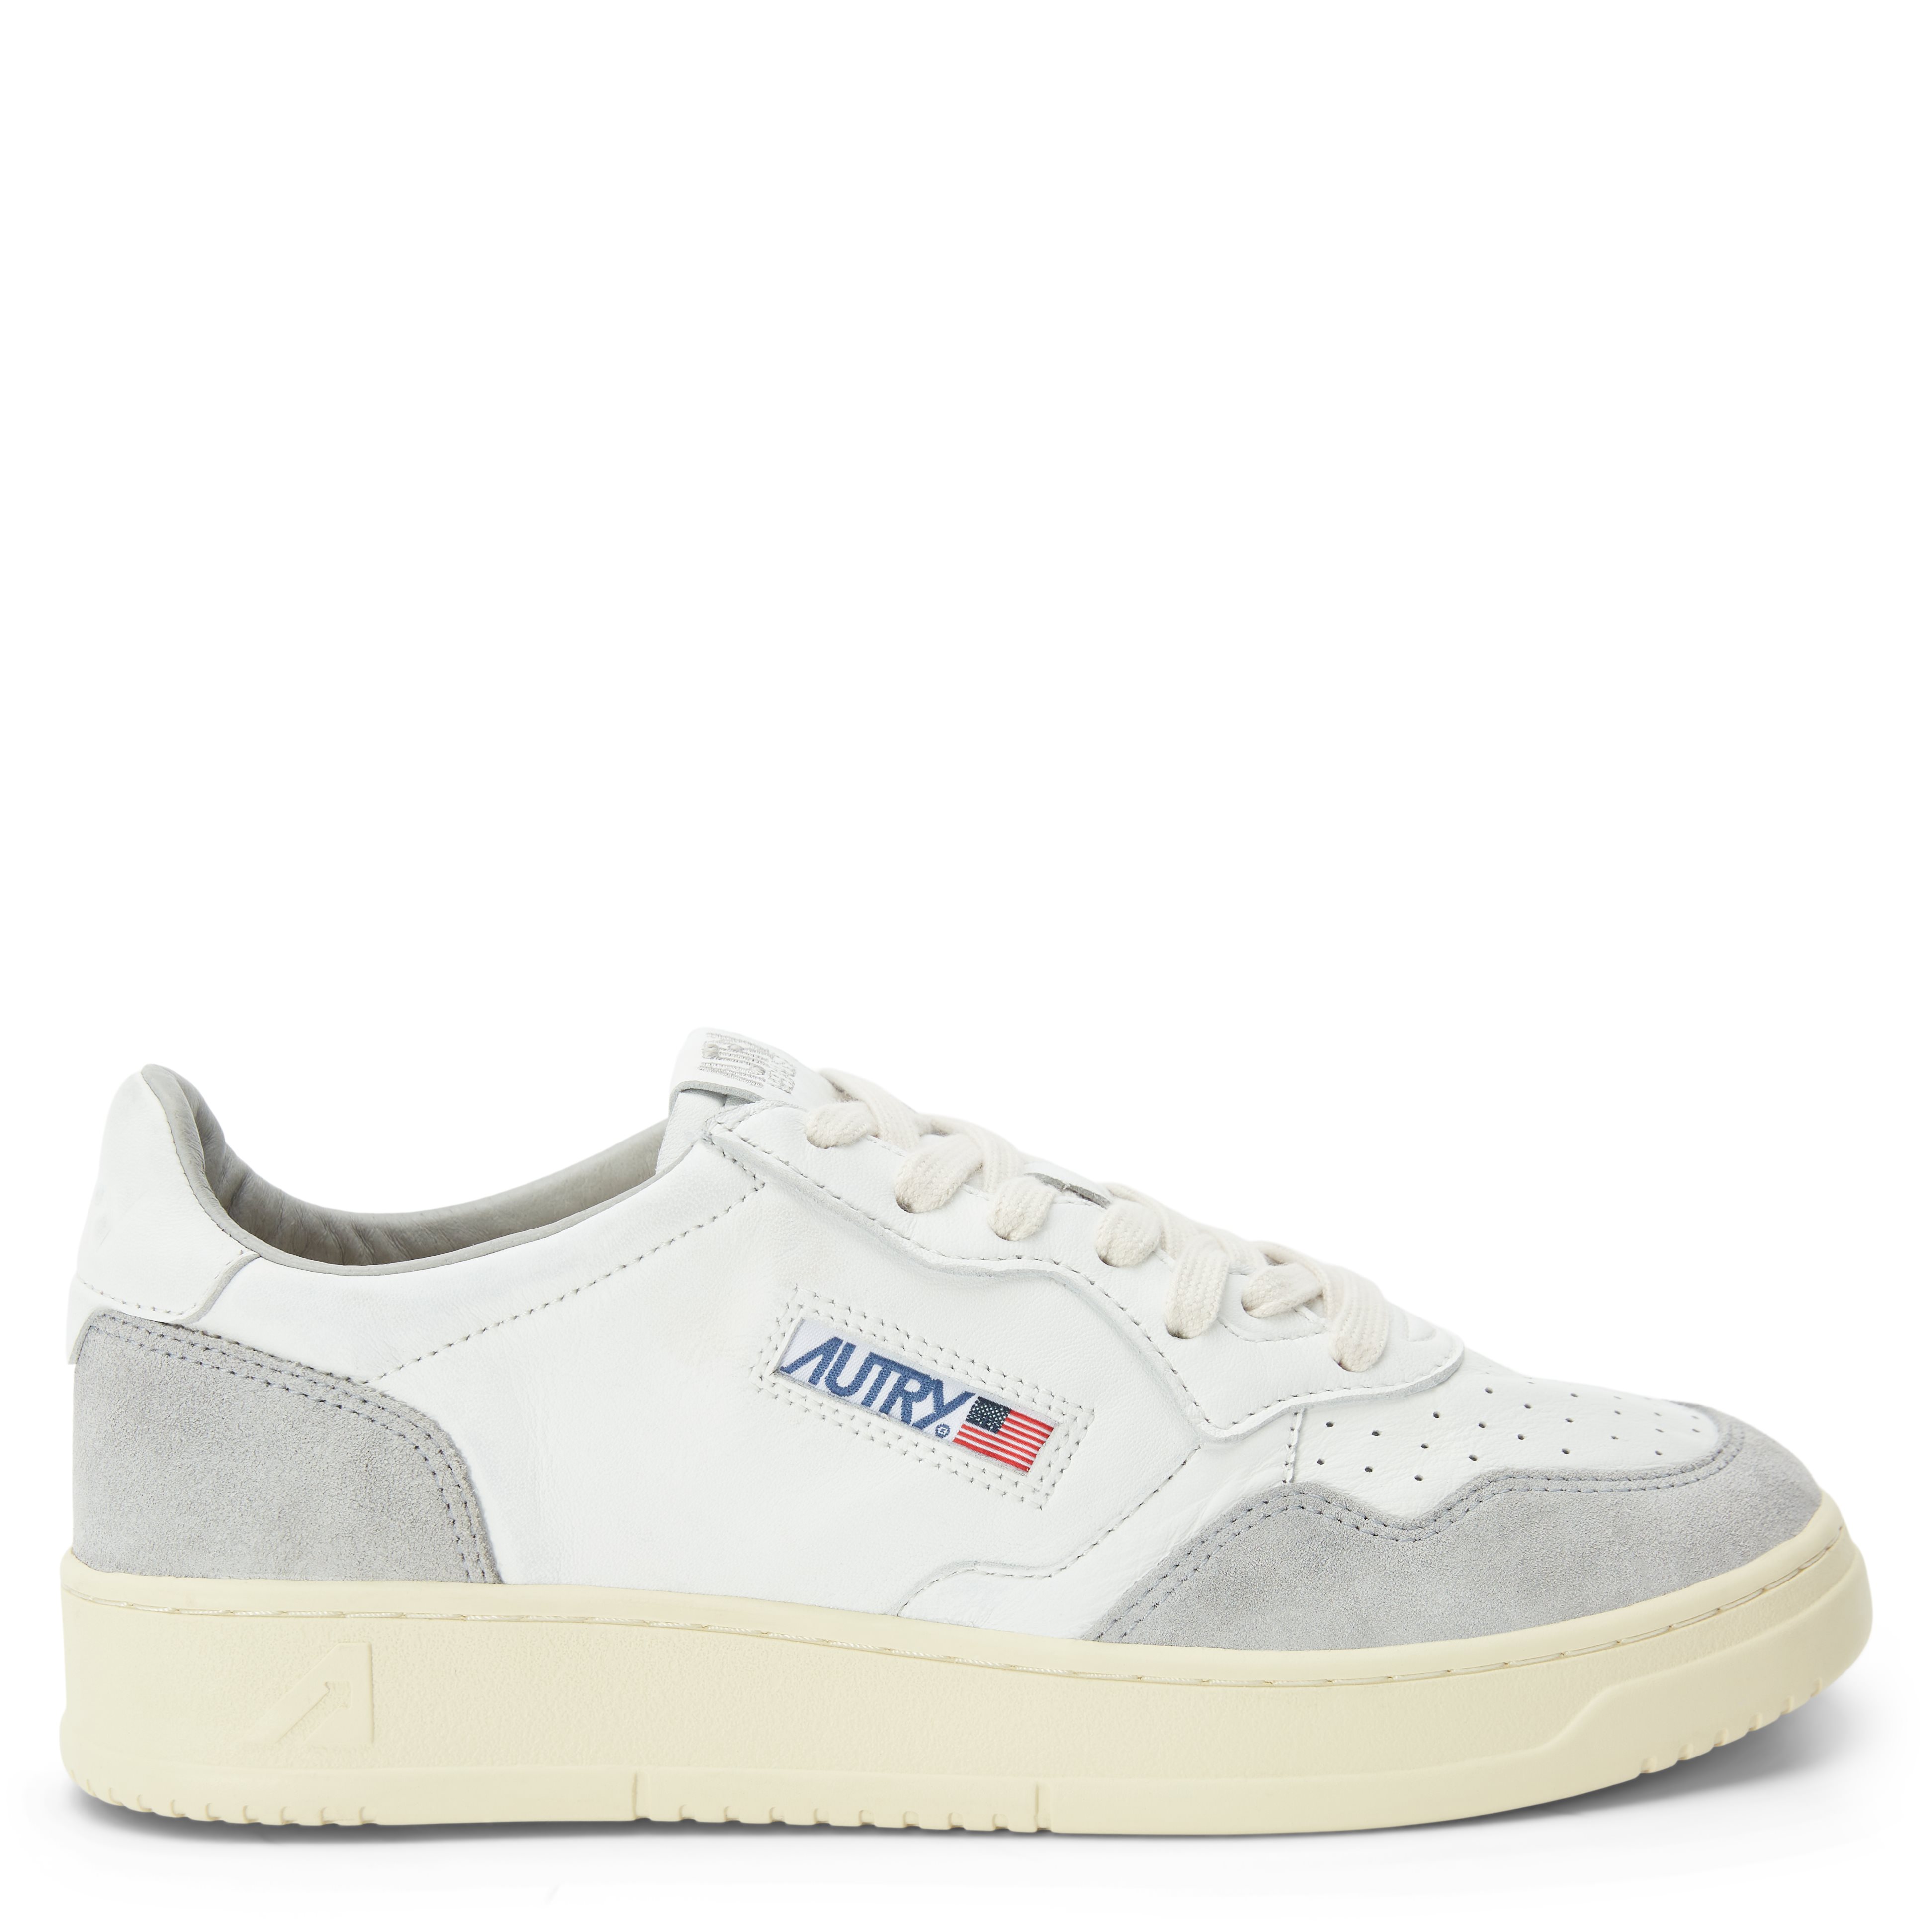 AUTRY Shoes AULM-GS25 White